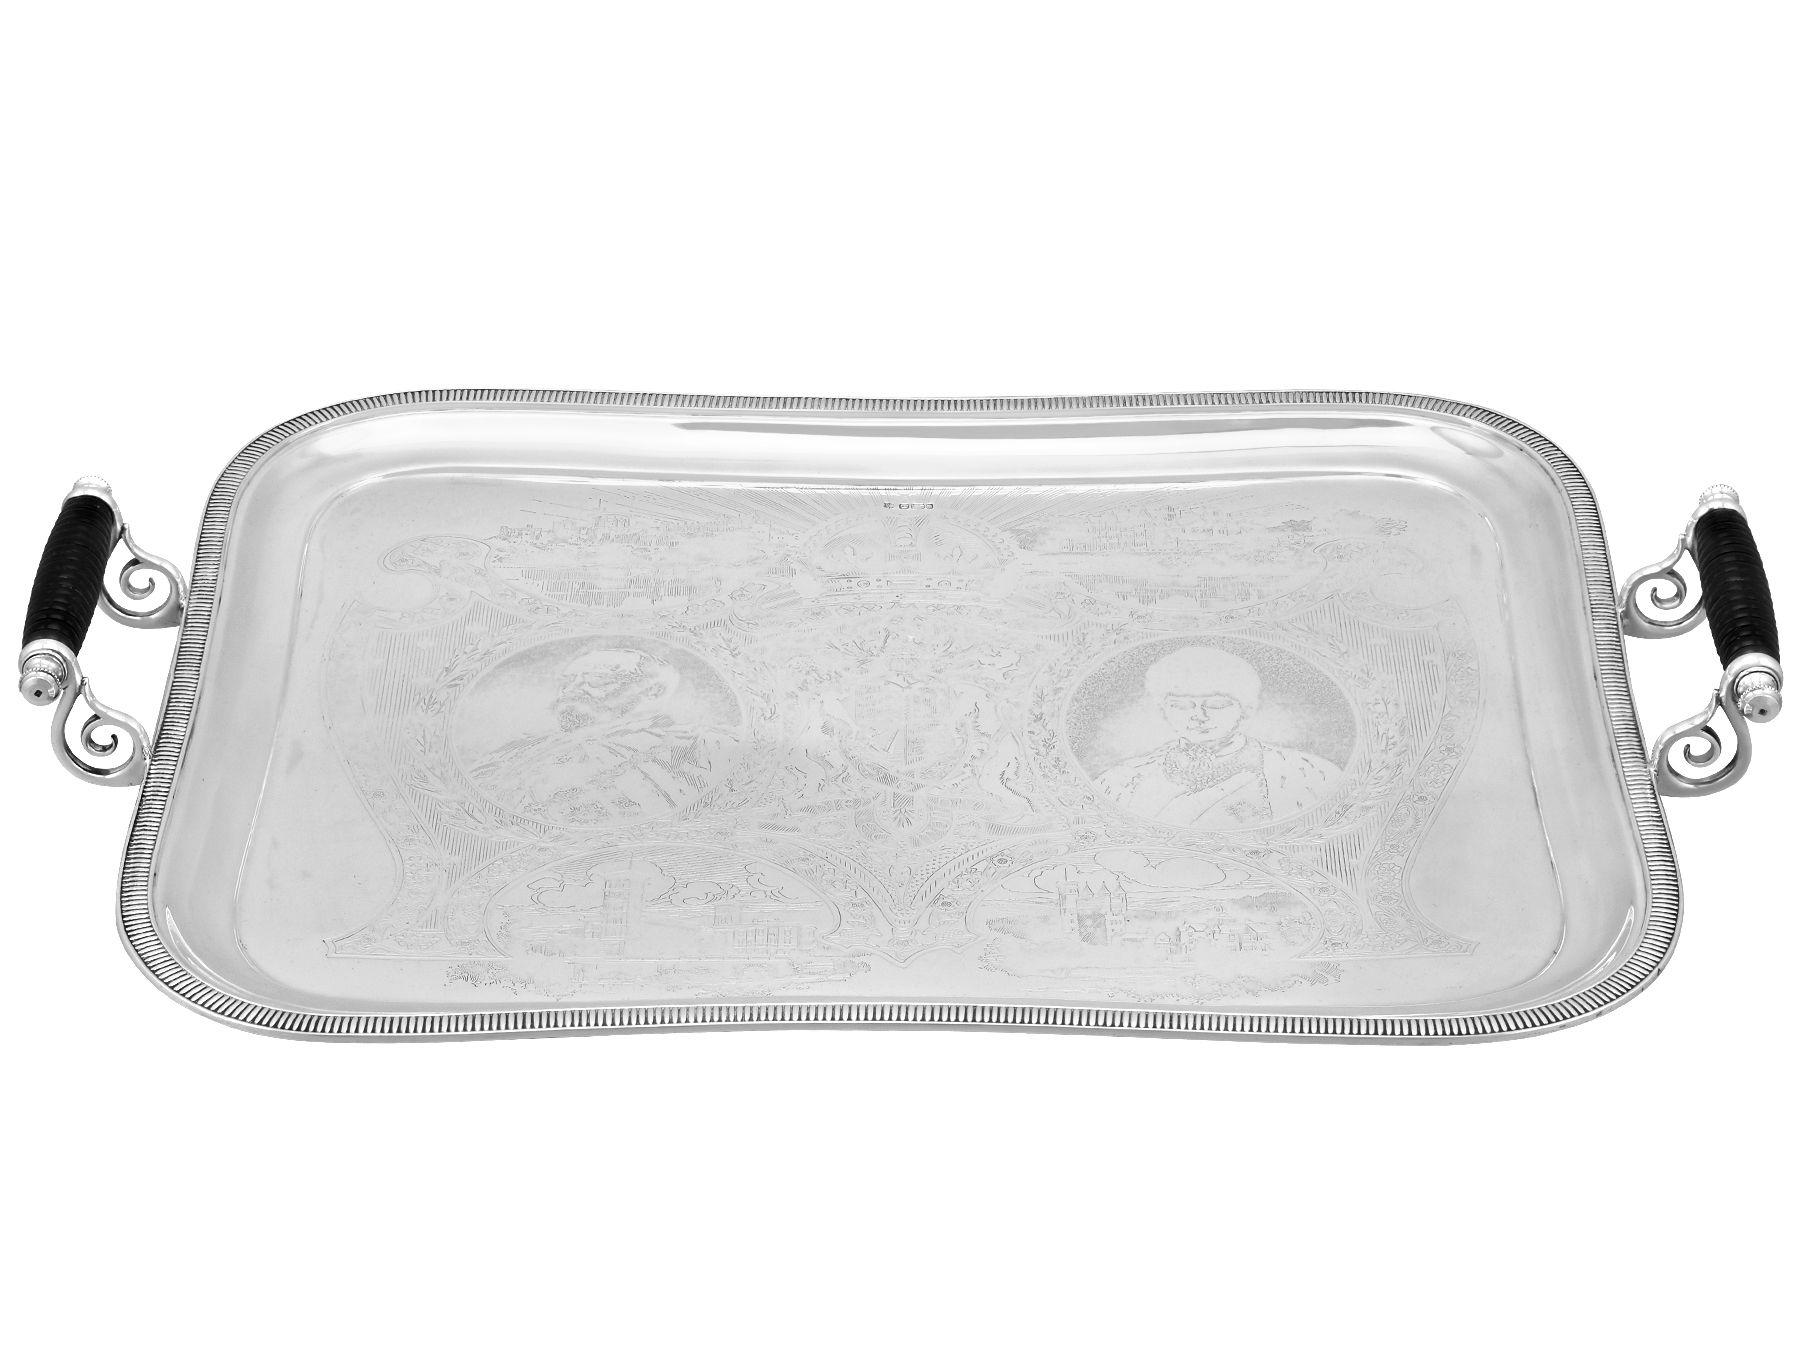 An exceptional, fine and impressive, rare antique Edwardian English sterling silver commemorative tray; an addition to our silver tray collection

This exceptional antique Edwardian sterling silver tray has a rectangular form with rounded